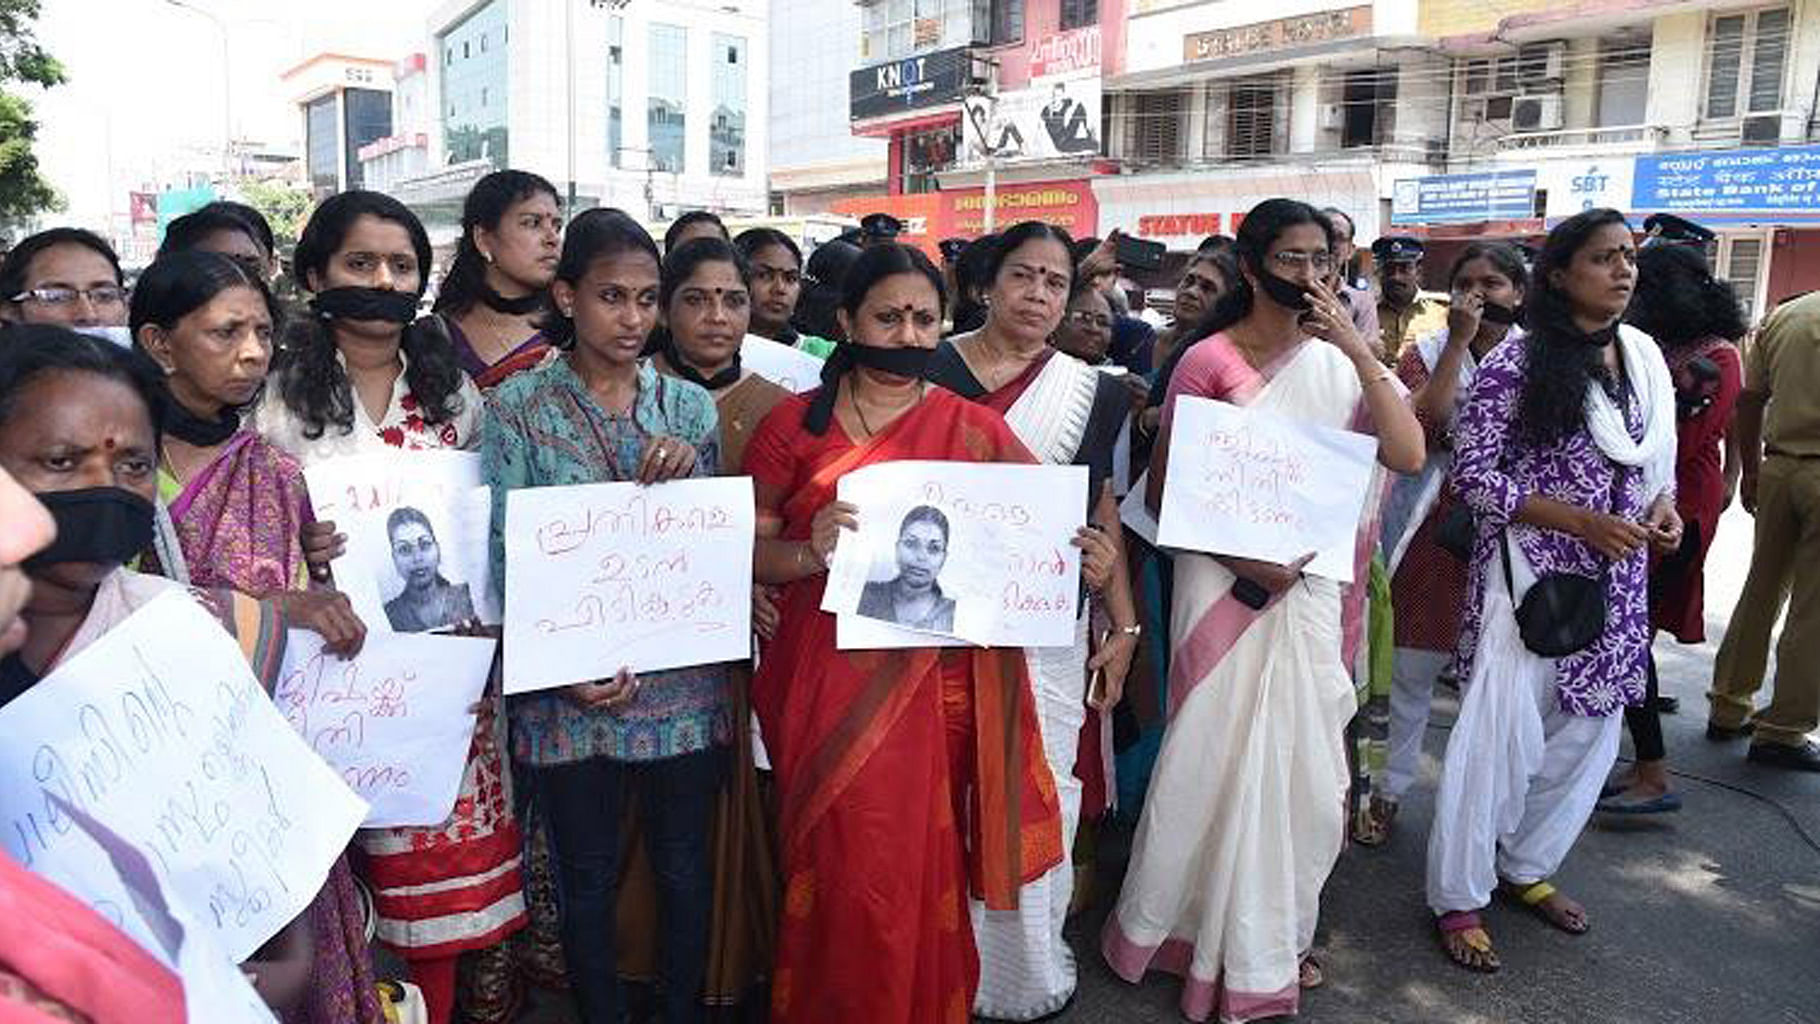 Women protest the brutal rape and murder of law student Jisha in Kerala. (Photo:<a href="https://www.facebook.com/cpimcc/"> CPIM’s Facebook page</a>)